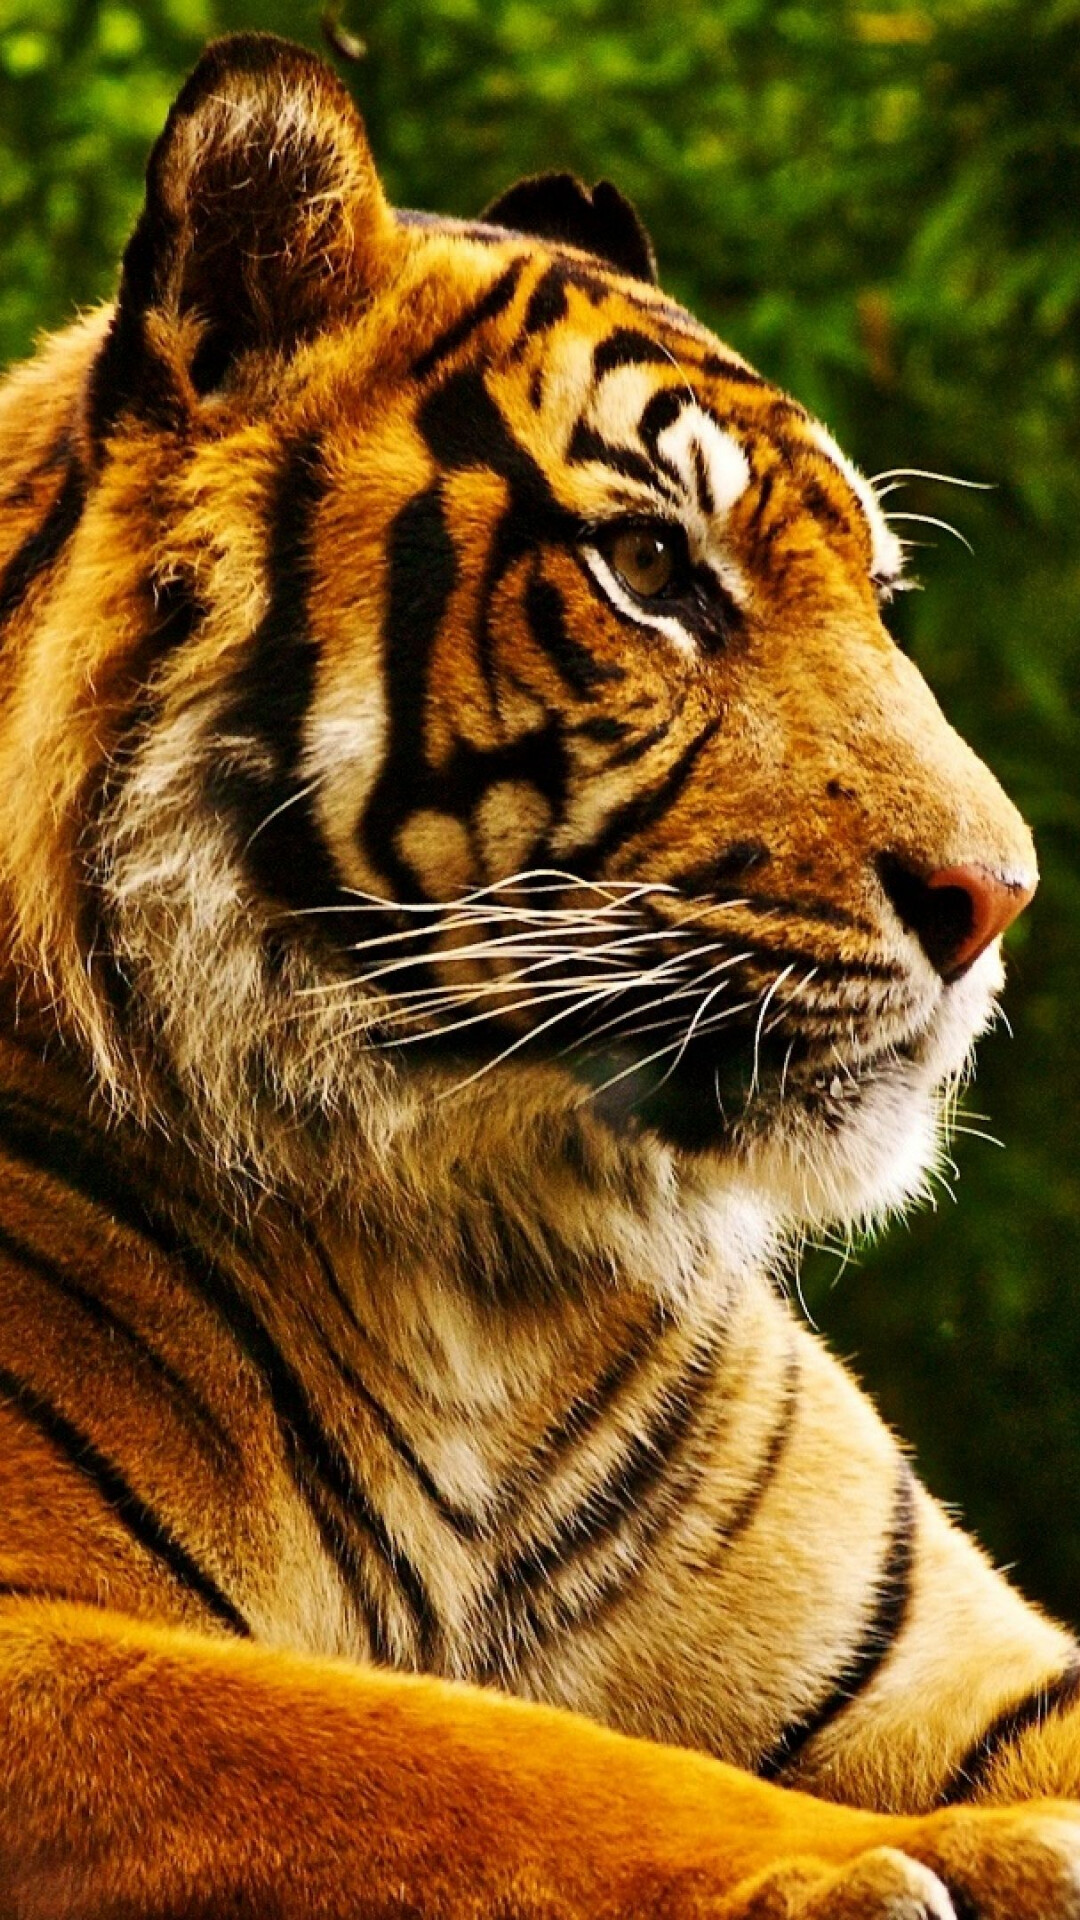 Tiger 2022, Tranquil atmosphere, Peaceful repose, 1080x1920 Full HD Handy